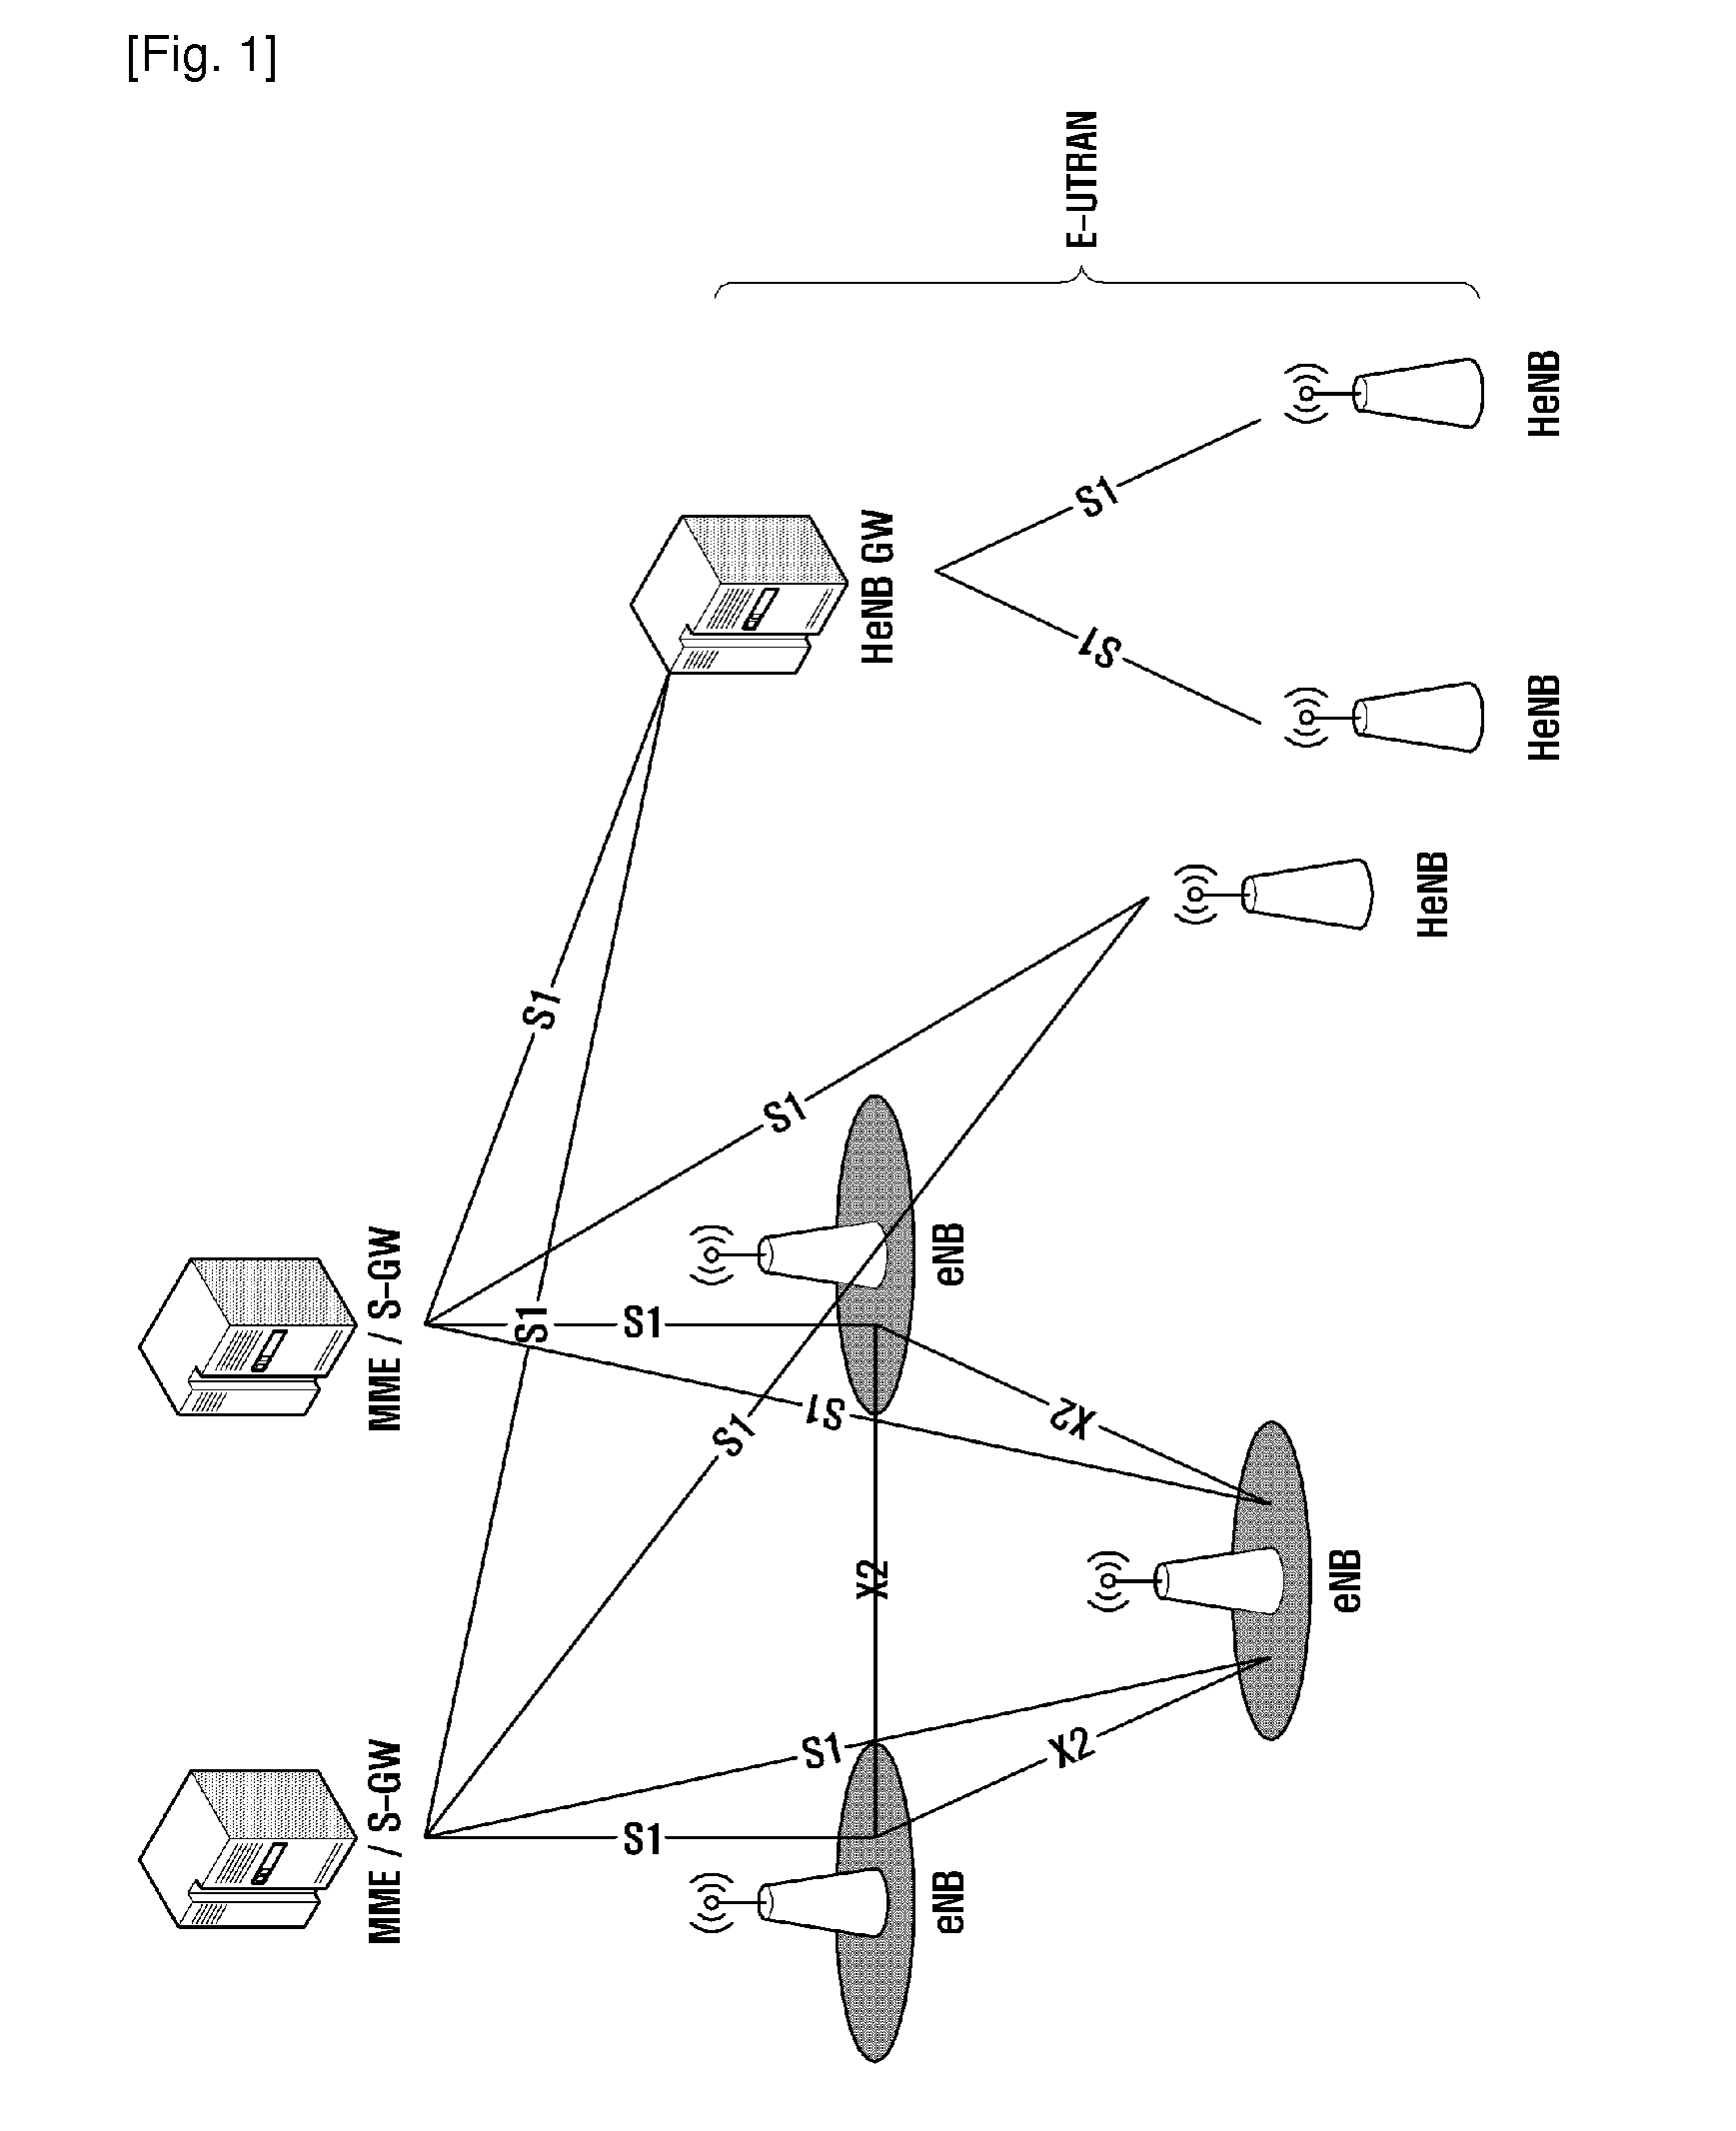 Method and system for remotely accessing